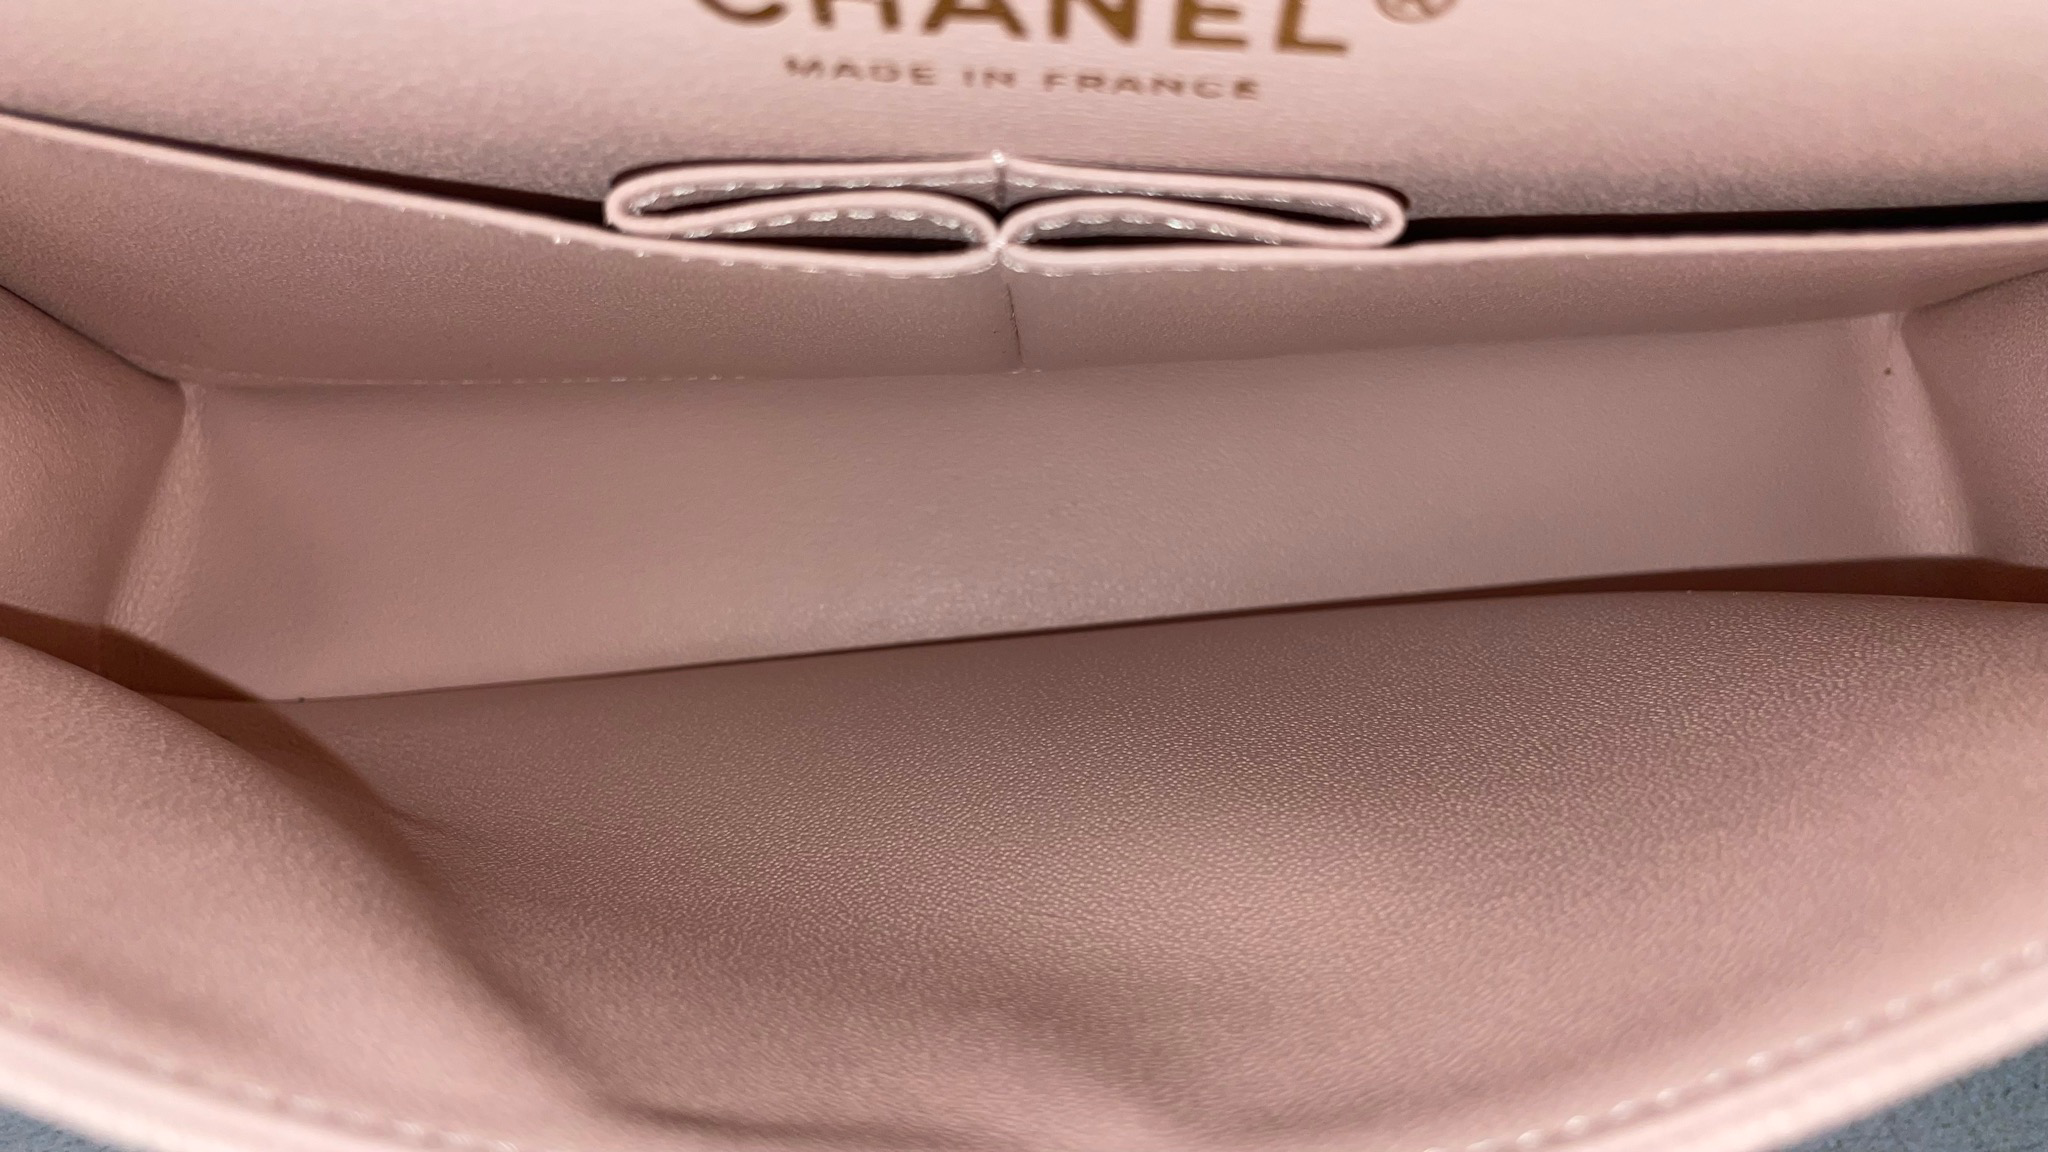 Chanel Classic Small, 21C Rose Claire Caviar with Gold Hardware, Preowned  in Box WA001